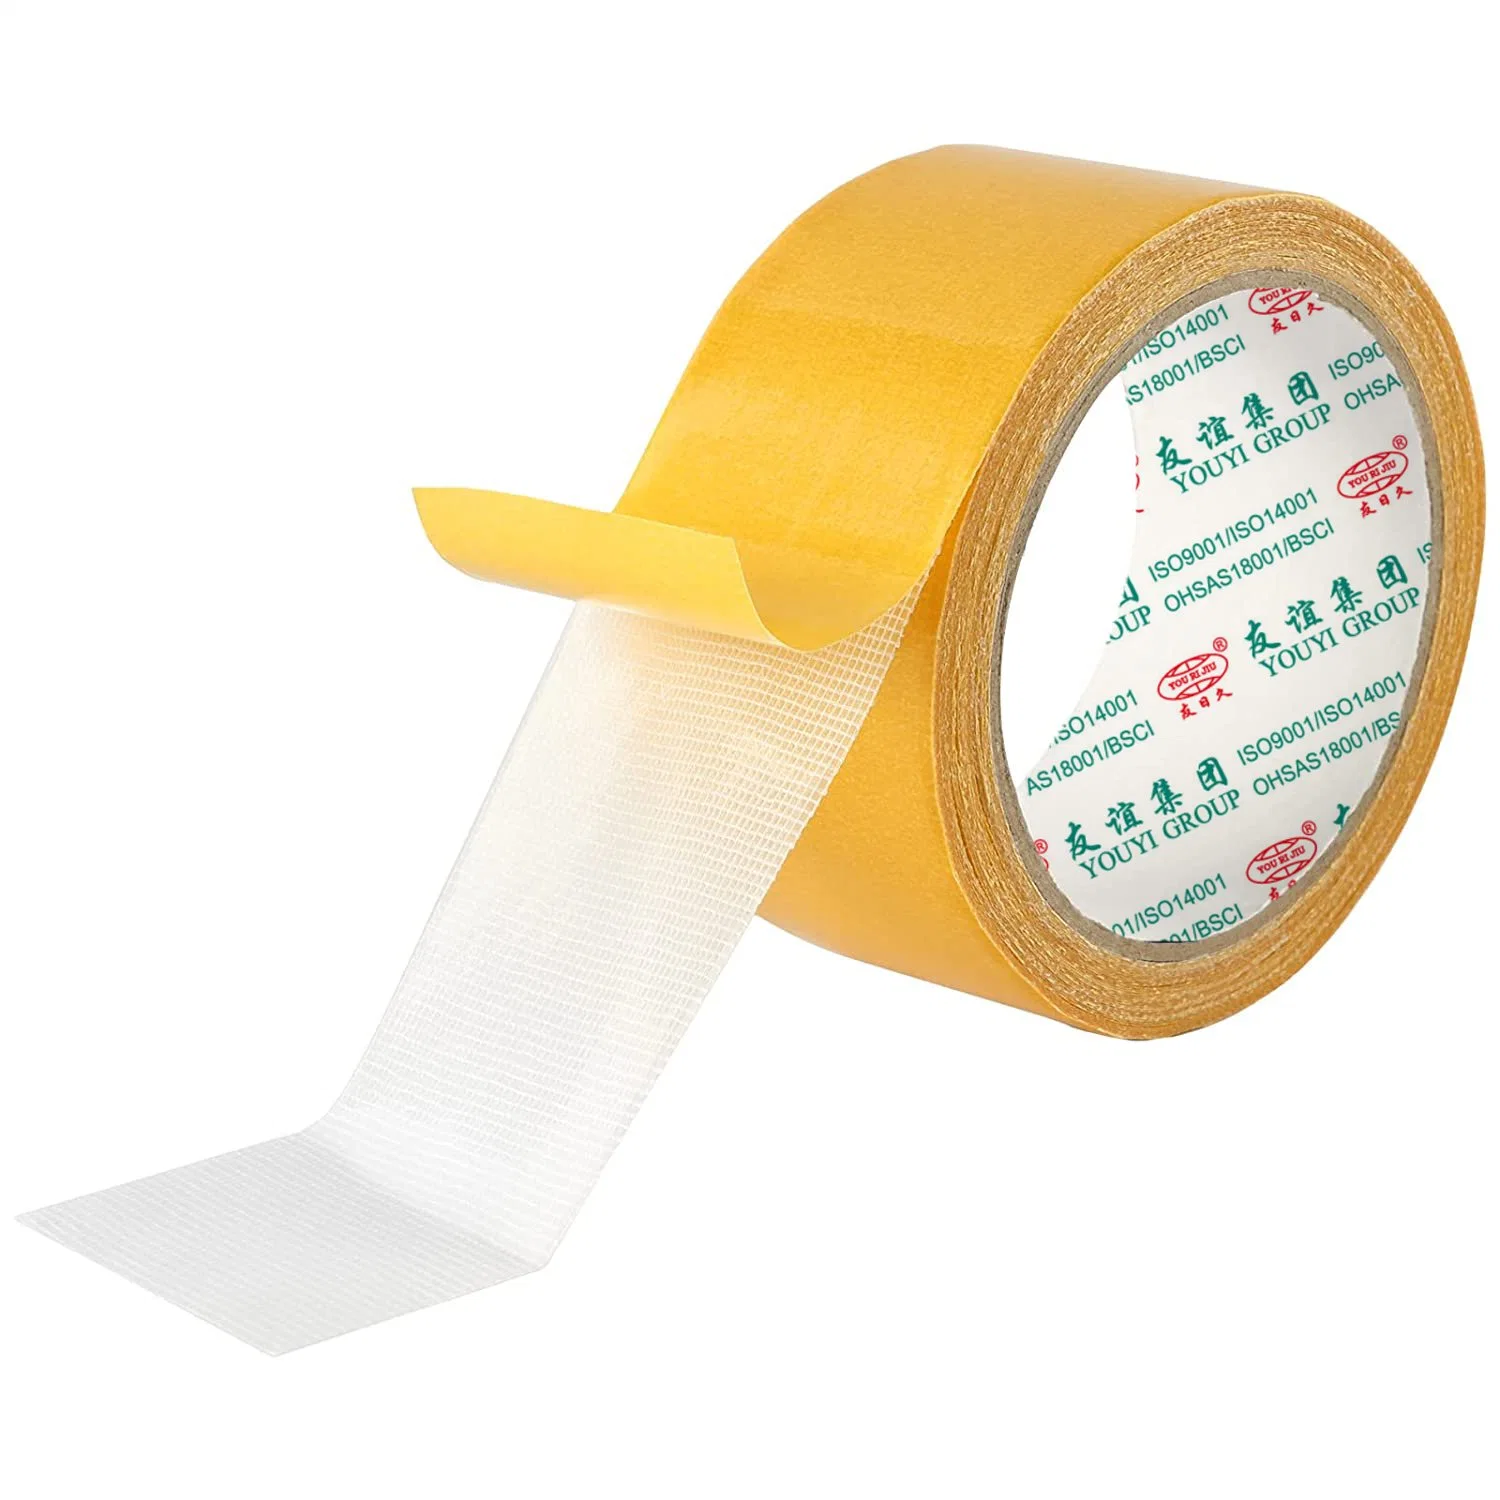 Yourijiu Heavy Packing Carpet Joint Rouhg Surface Strong Adhesion Wholesale Jumbo Roll Size Double Sided Cloth Tape